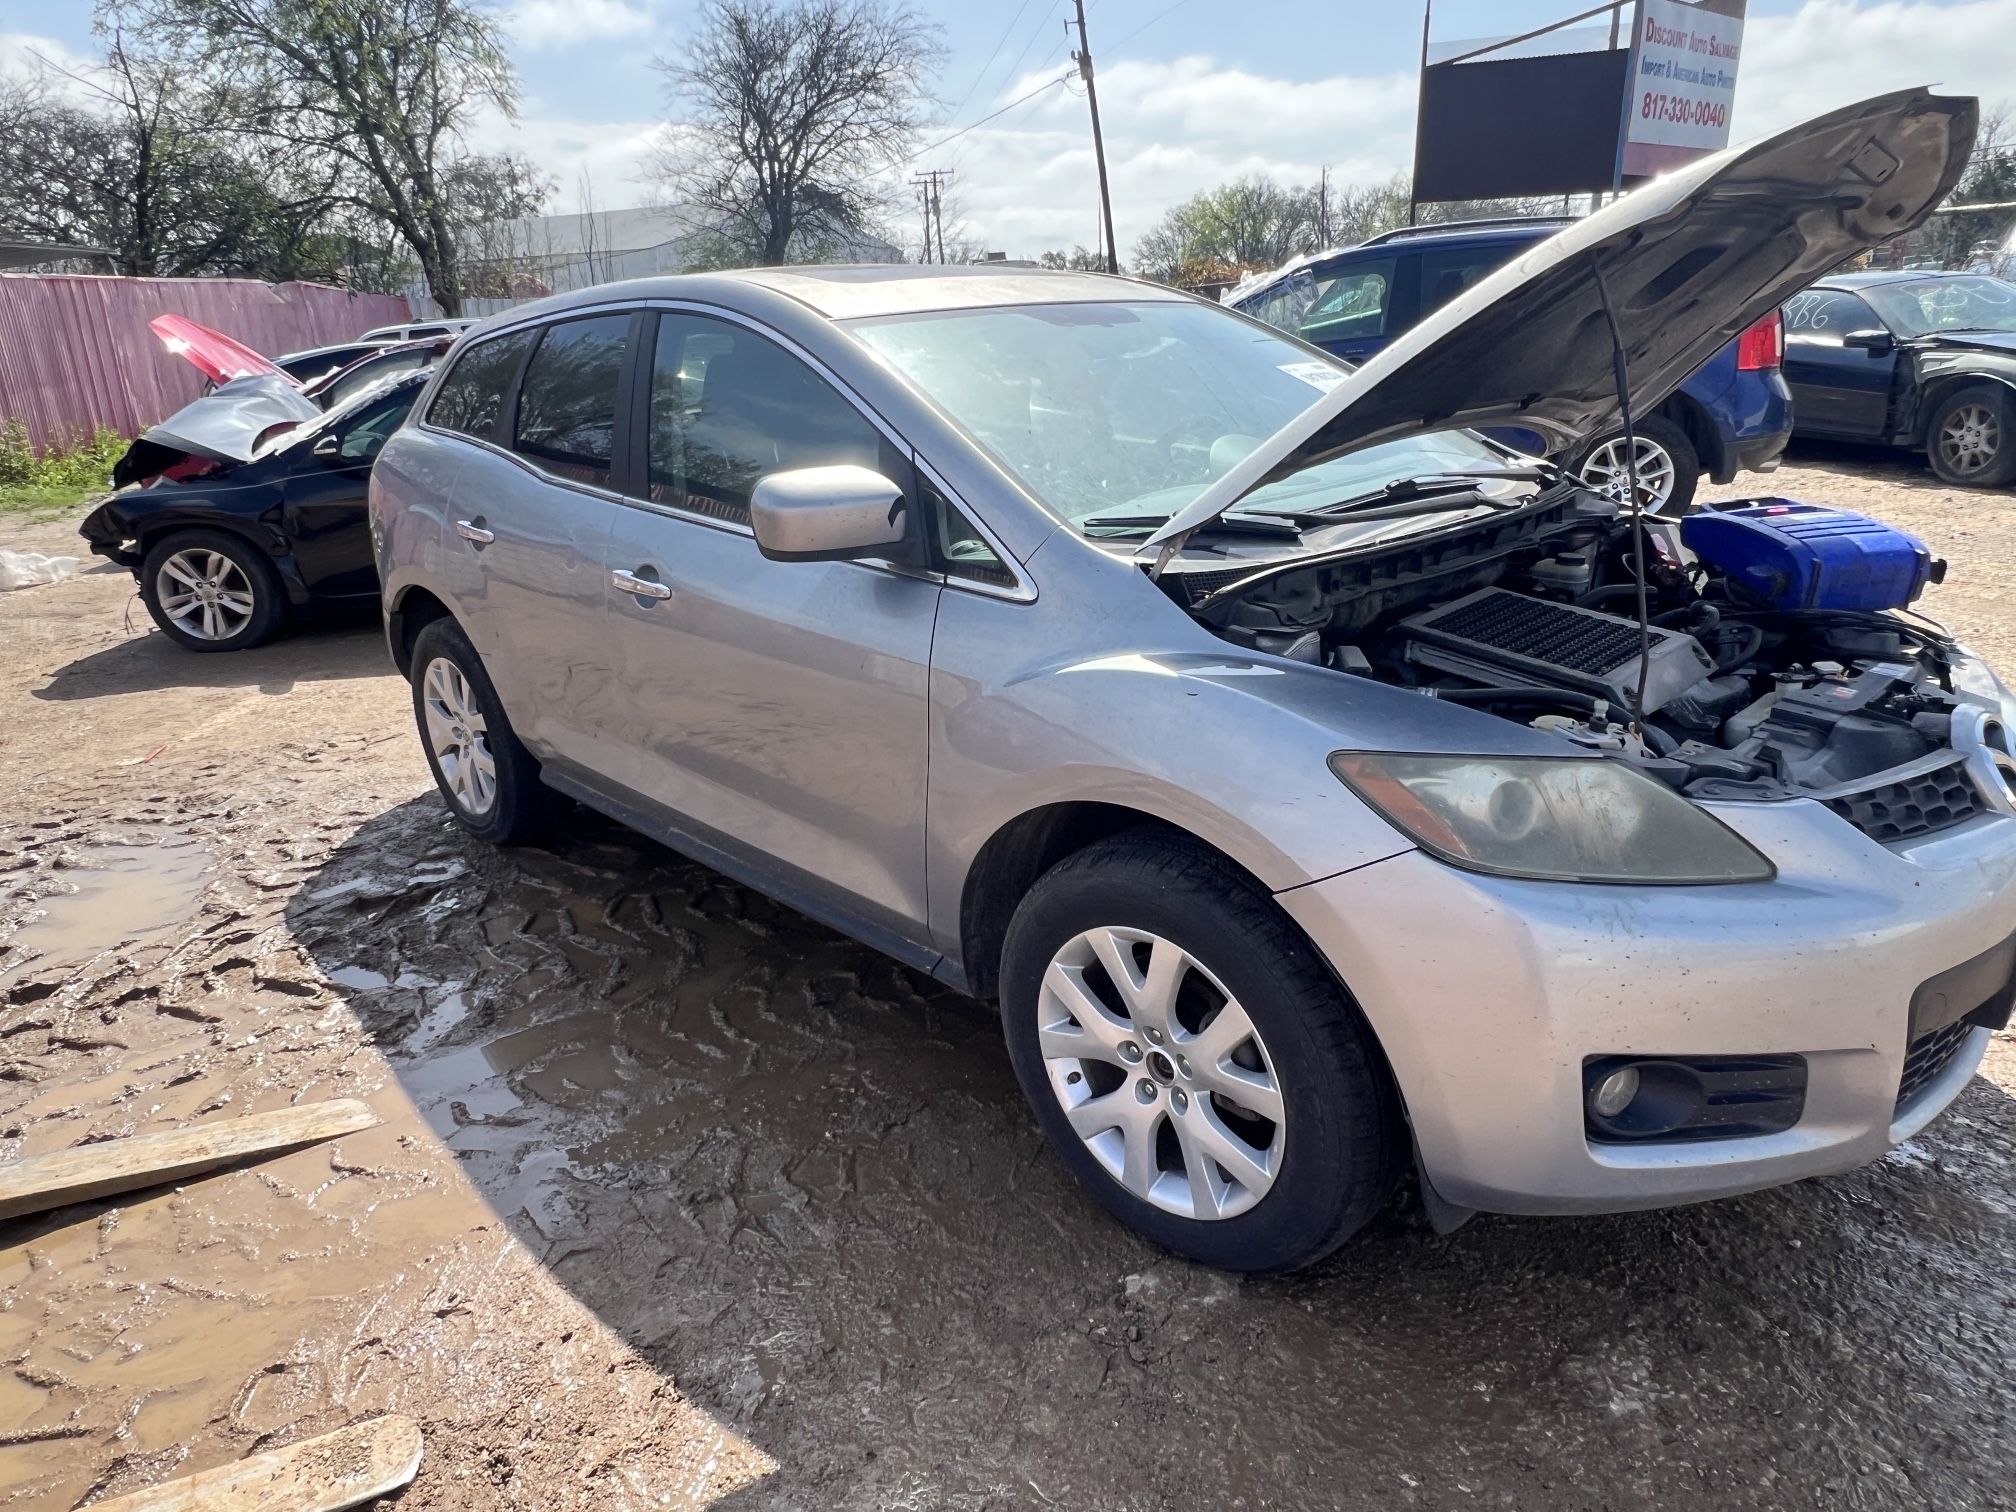 2007 Mazda CX7 - Parts Only #CB9